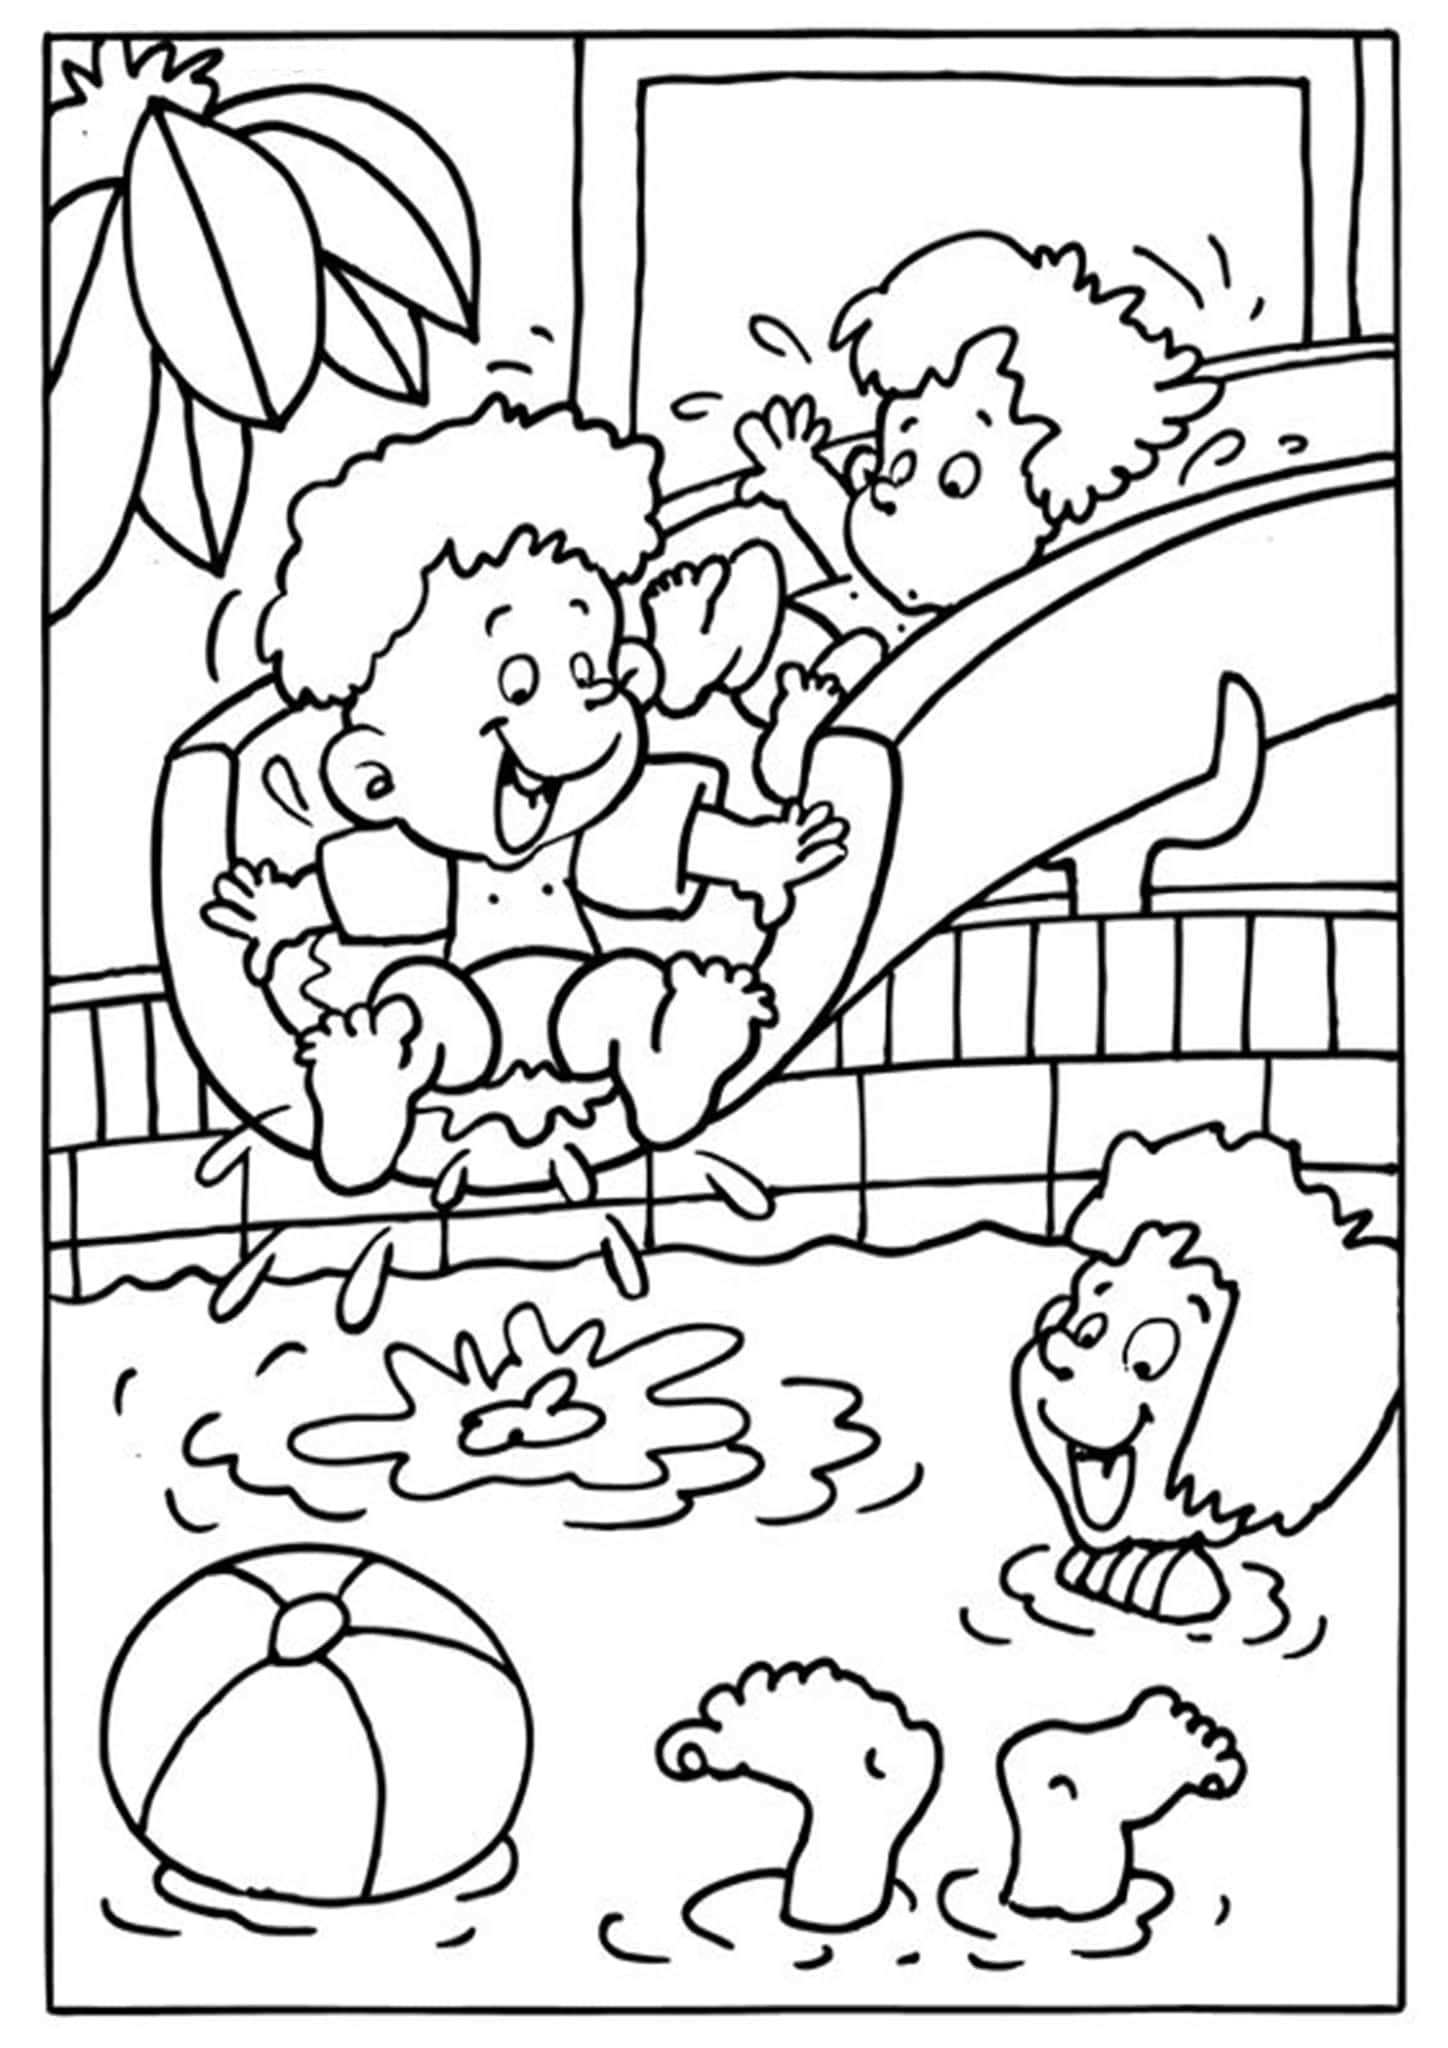 Free Easy To Print Summer Coloring Pages Summer Coloring Pages Coloring Pages Coloring Books